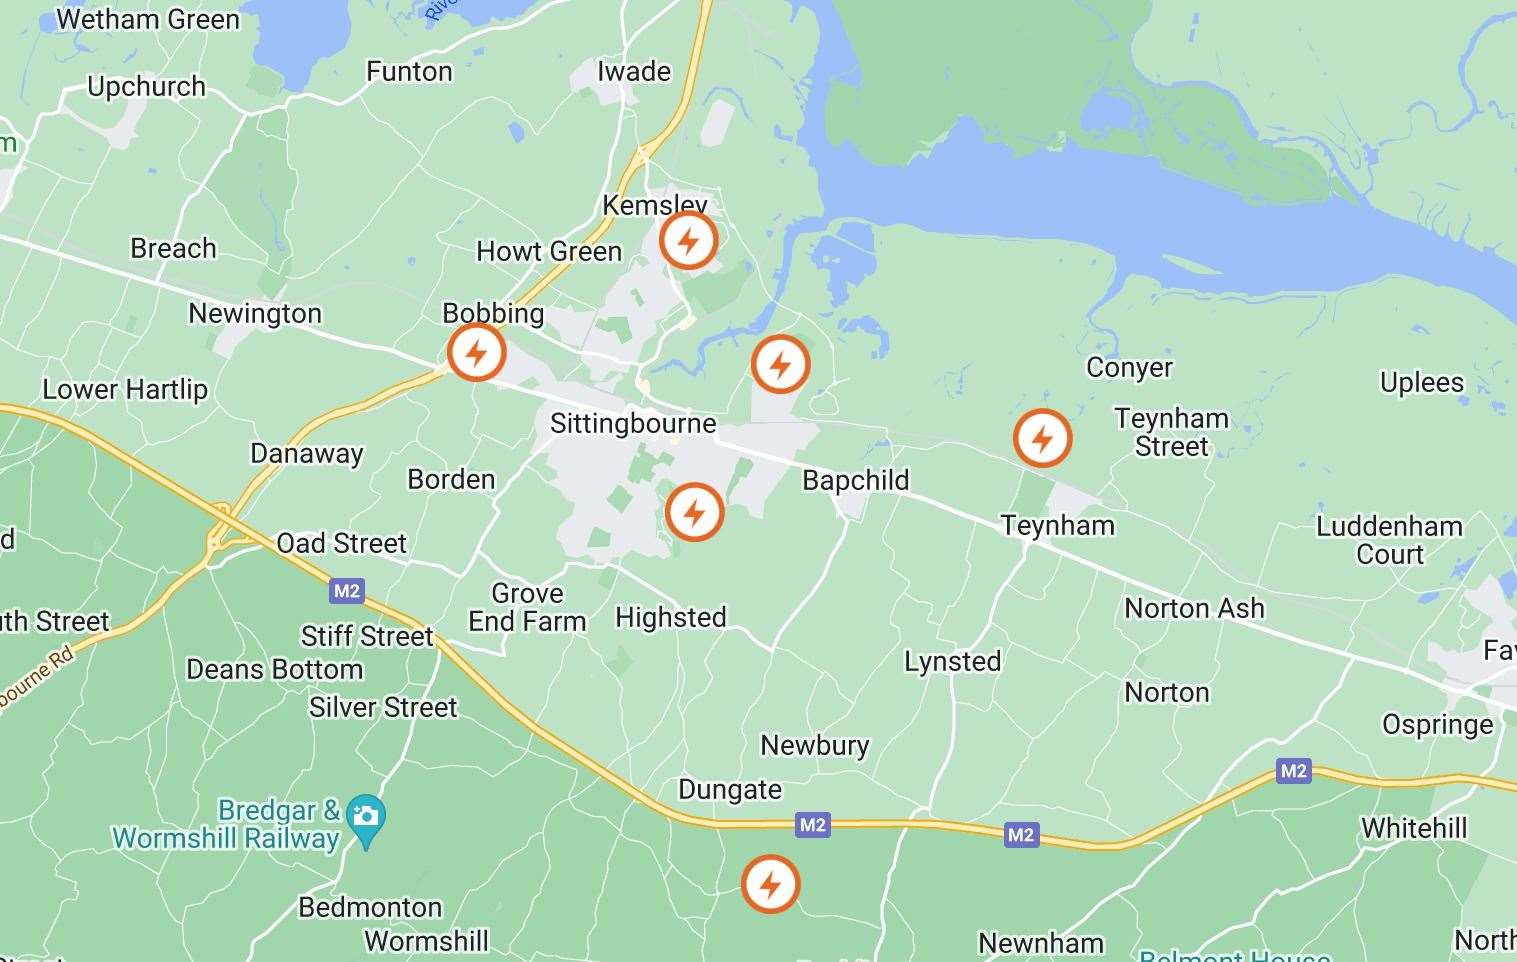 Sittingbourne has also been affected this afternoon. Picture: UK Power Networks